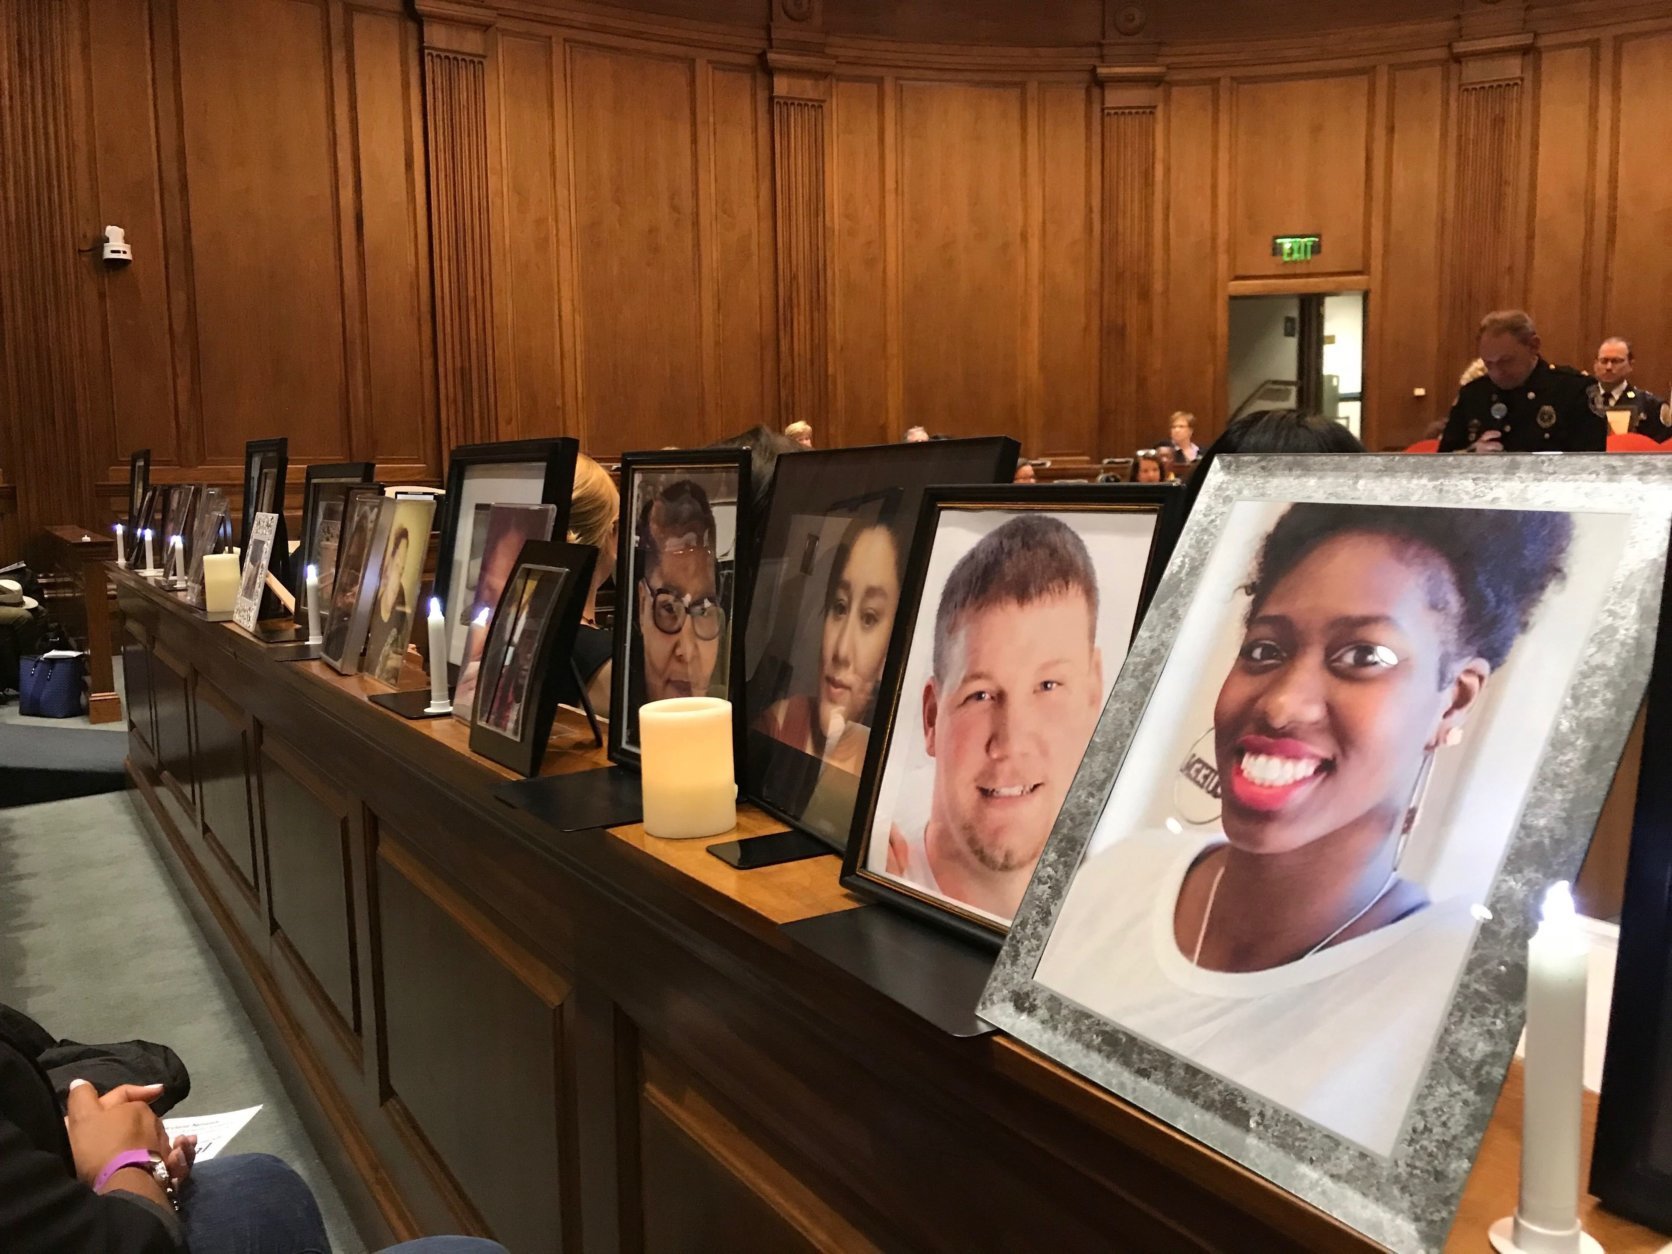 Between July 2017 and June 2018, there were 46 deaths from domestic violence in Maryland. (WTOP/Dick Uliano)